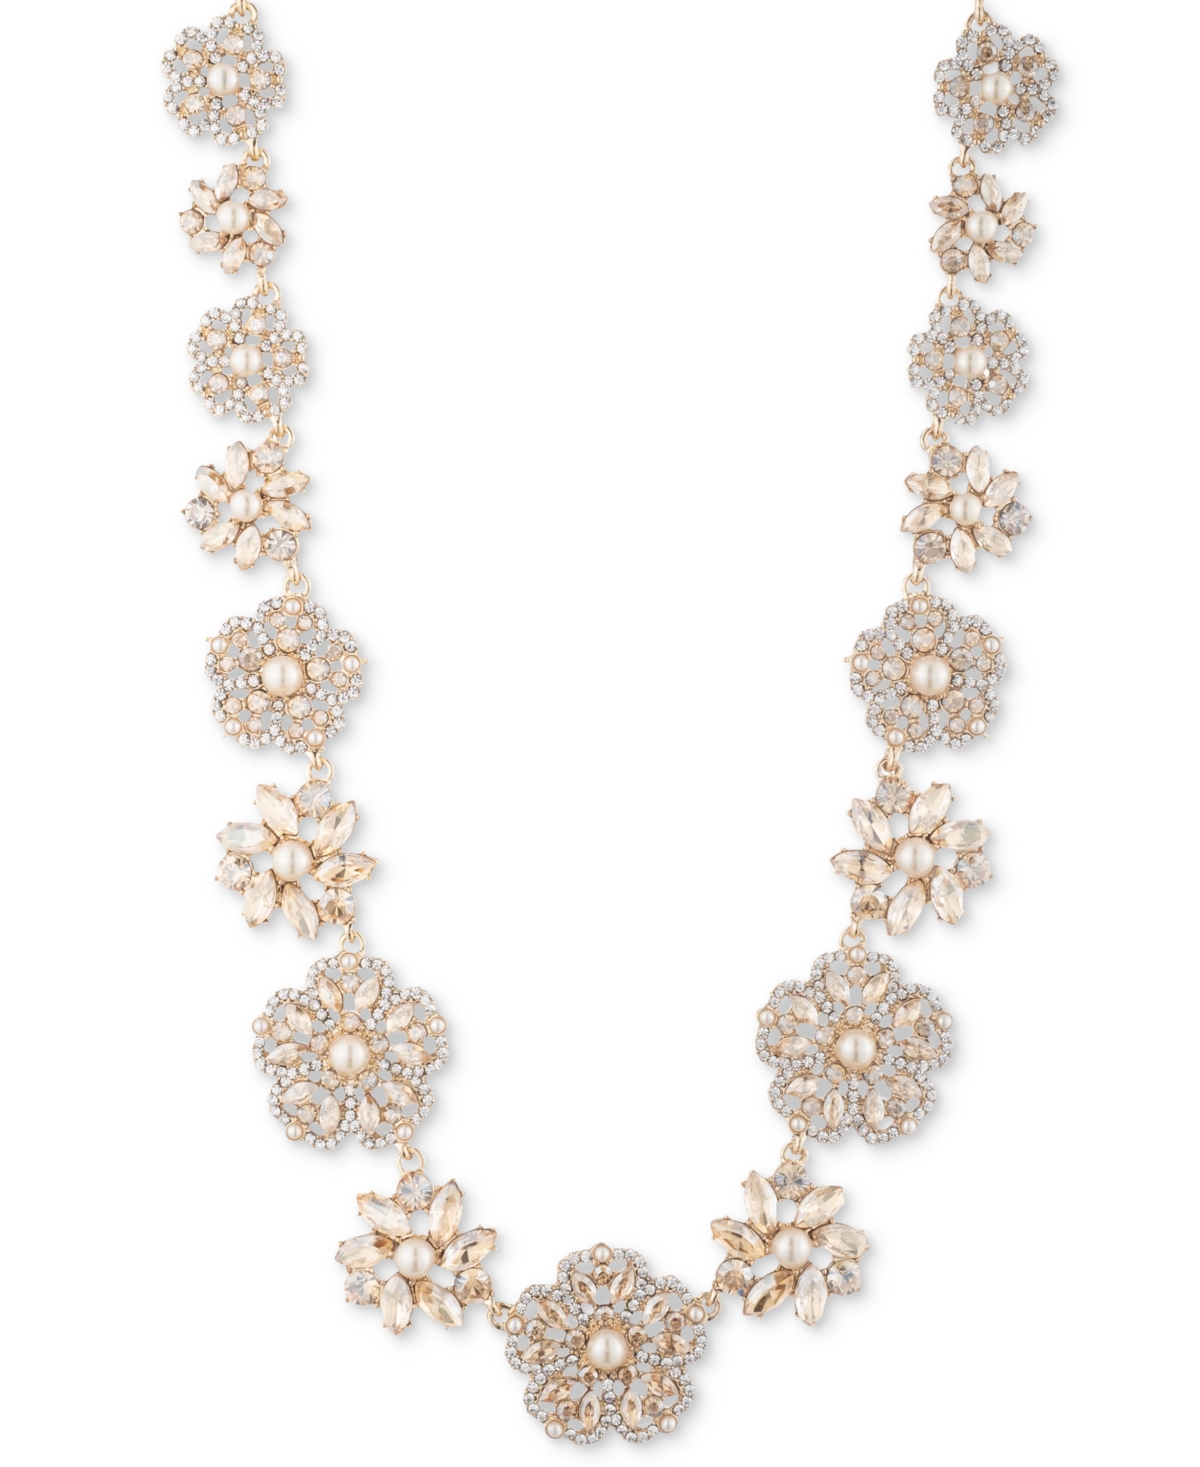 MARCHESA GOLD-TONE CRYSTAL & IMITATION PEARL CLUSTER FLOWER ALL-AROUND COLLAR NECKLACE, 16" + 3" EXTENDER